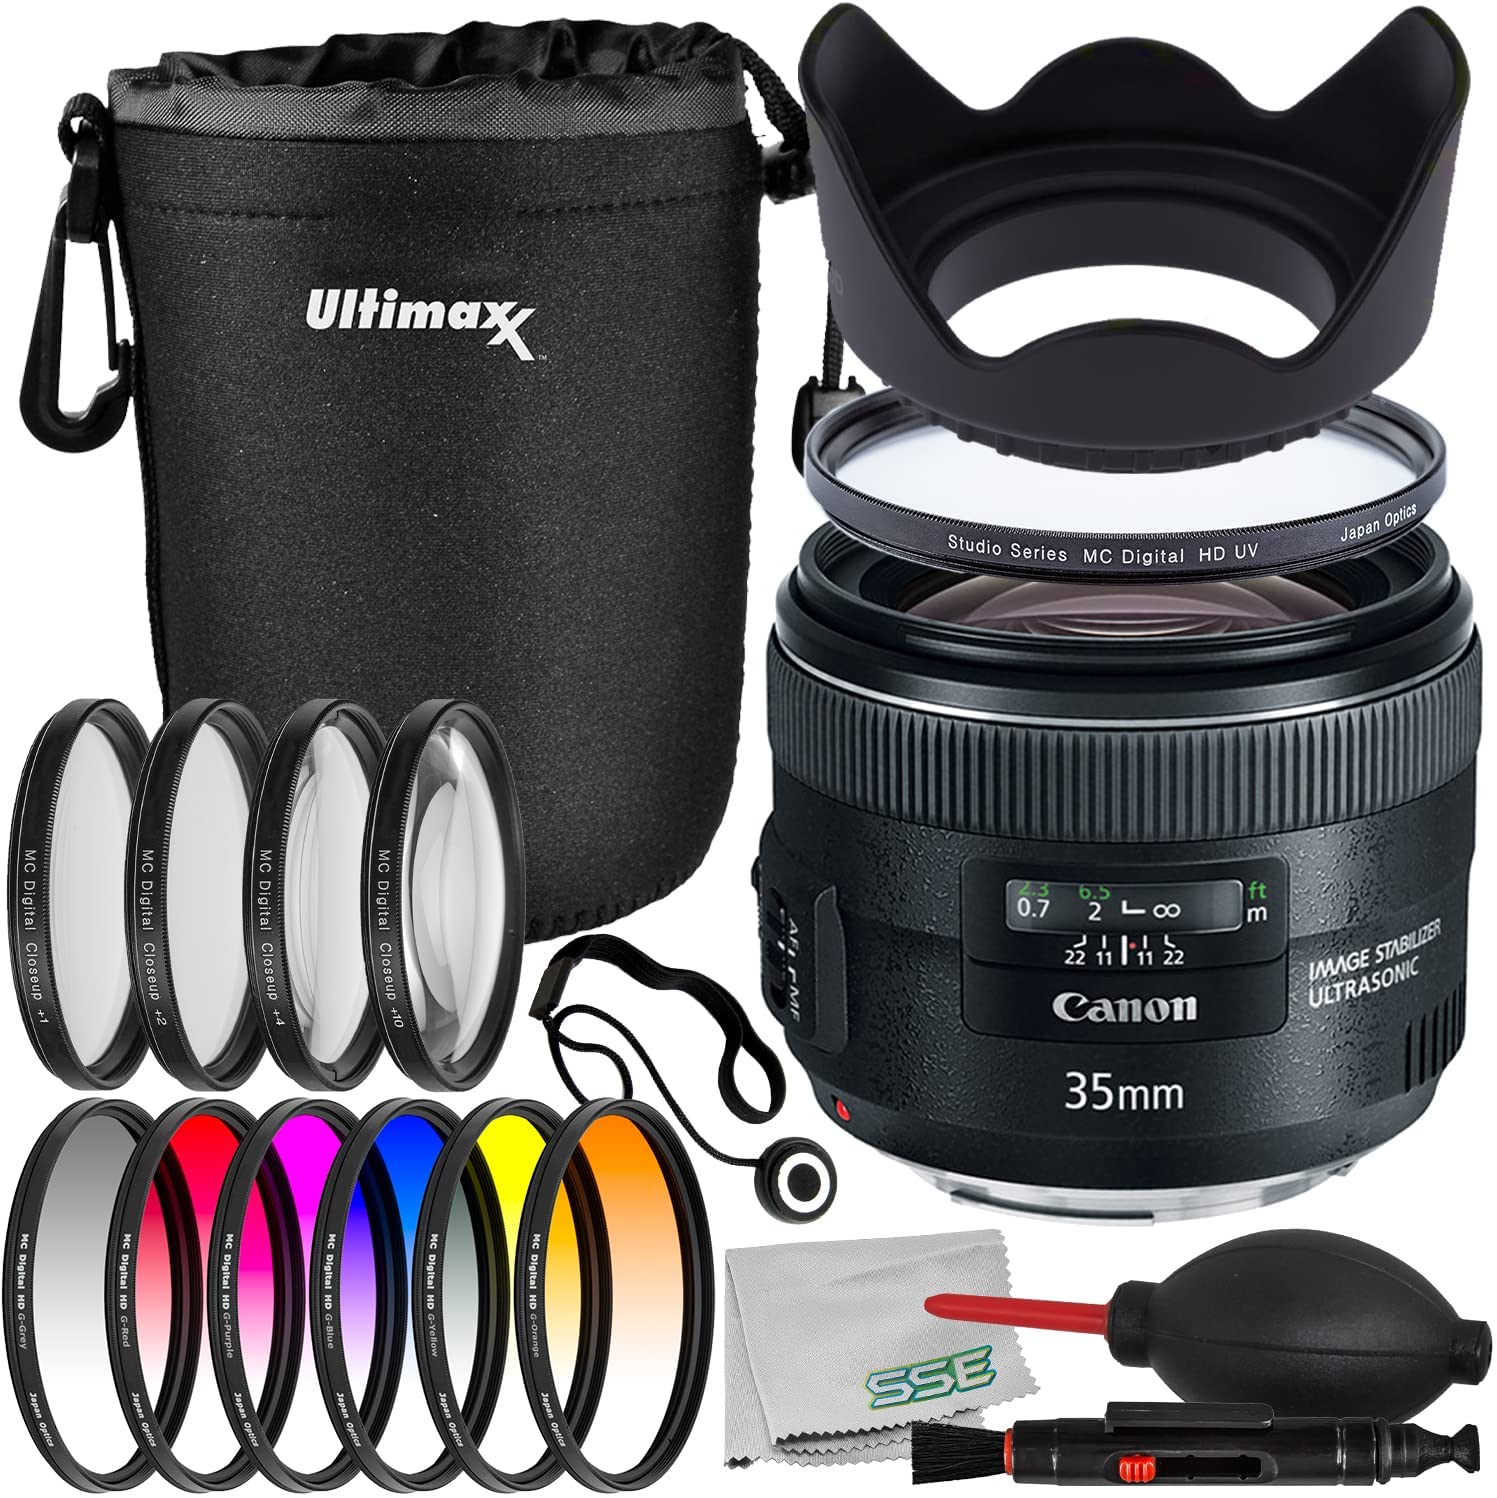 Canon EF 35mm f/2 is USM Lens + Water Resistant Lens Pouch, Multi-Coated Digital HD UV Filter, 4PC Macro Close-Up Filter Kit (+1, 2, 4, 10 Diopter), 6PC Gradual Color Filter Kit &More (20pc Bundle)